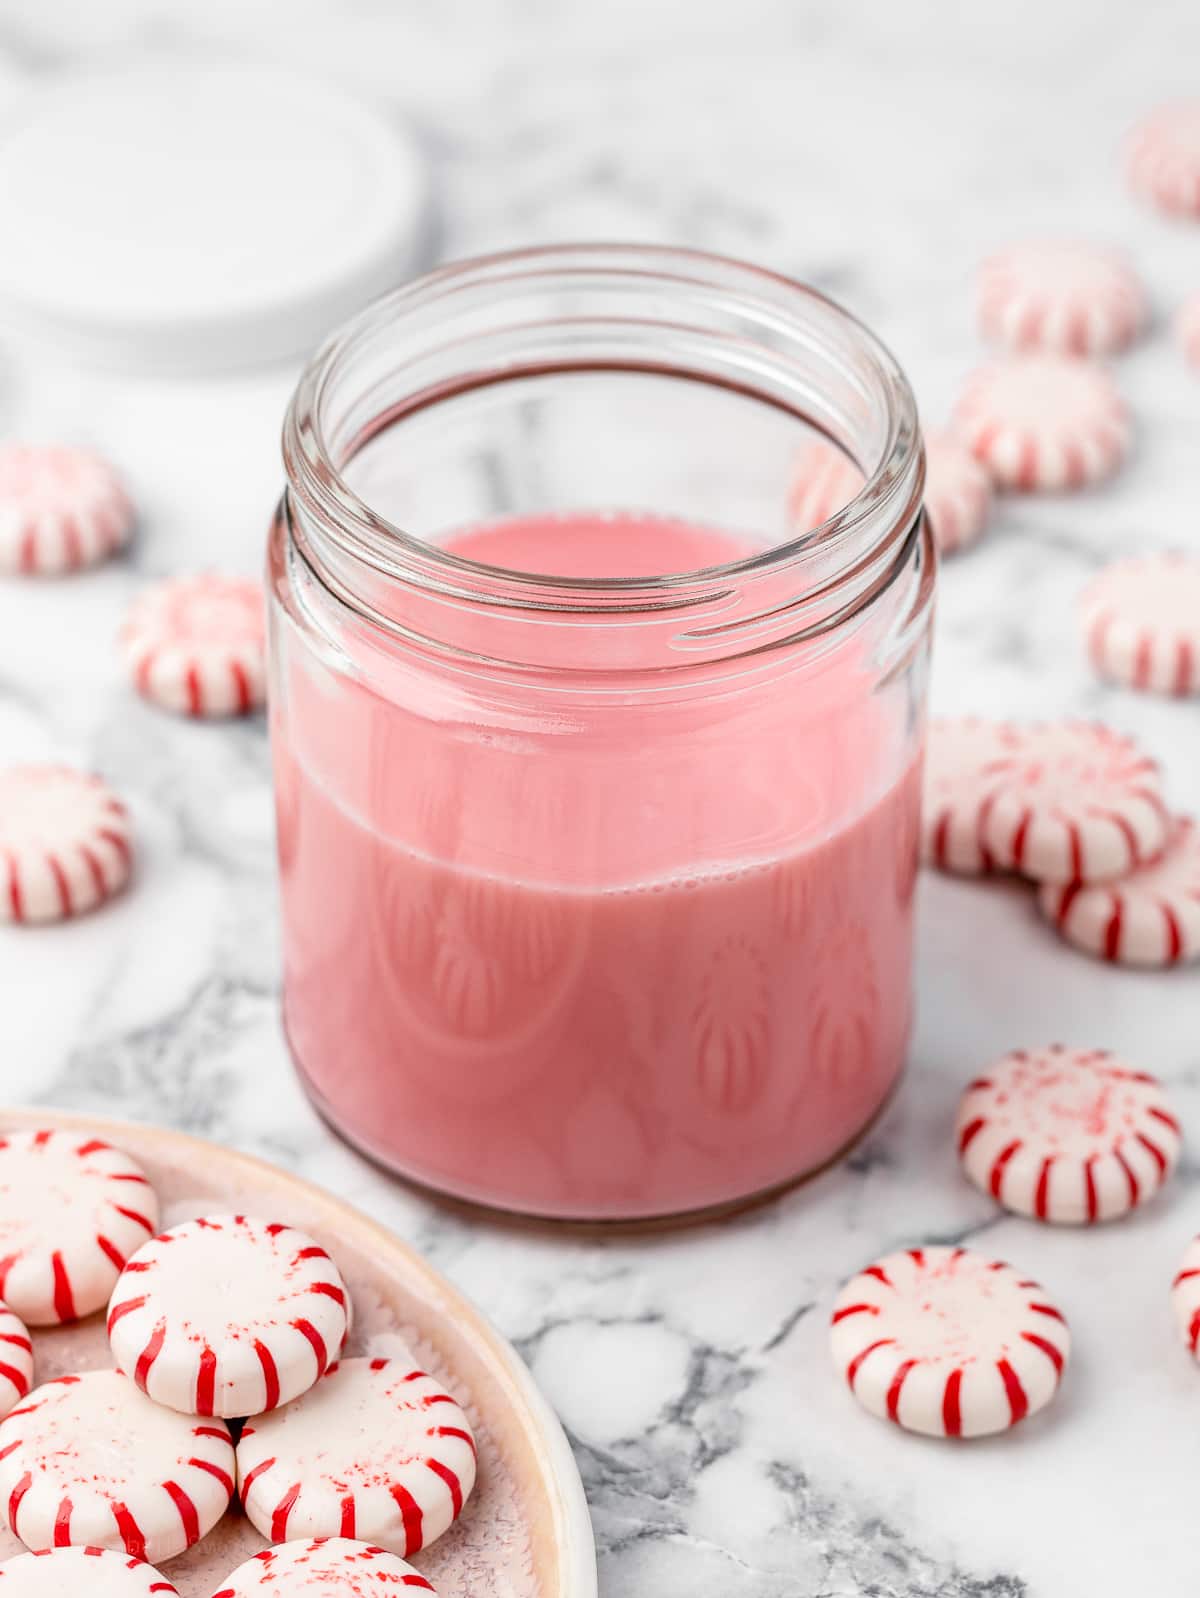 Light pink Peppermint Simple Syrup ready to use in coffee, mocktails, and other holiday drinks.